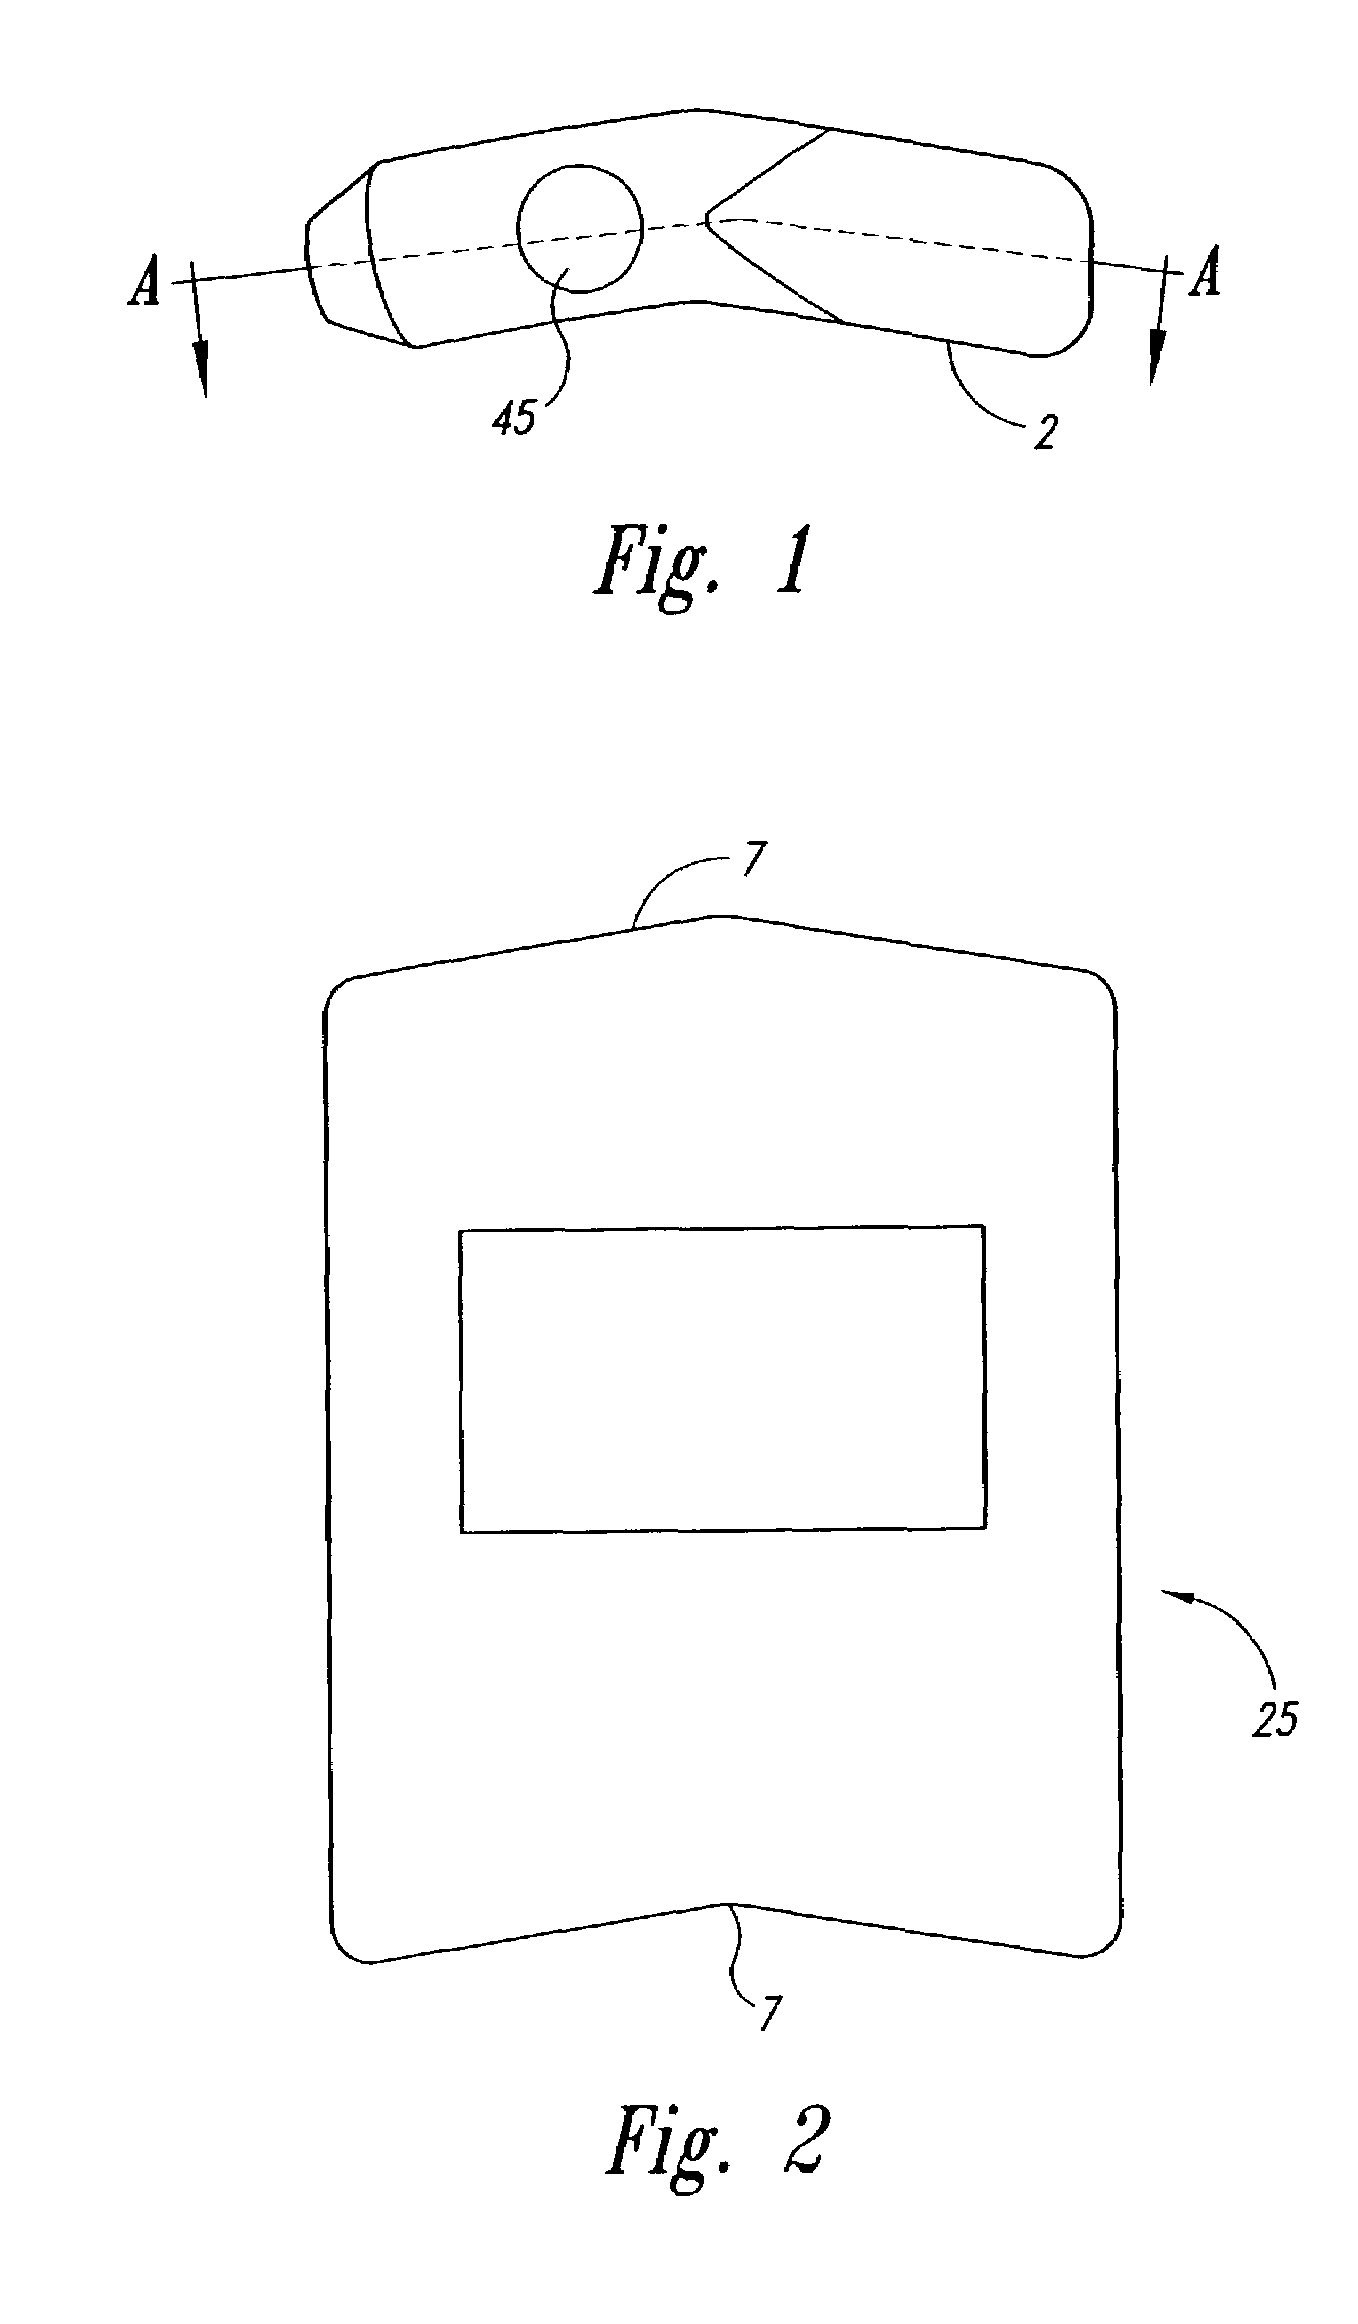 Particle dispersion device for nasal delivery